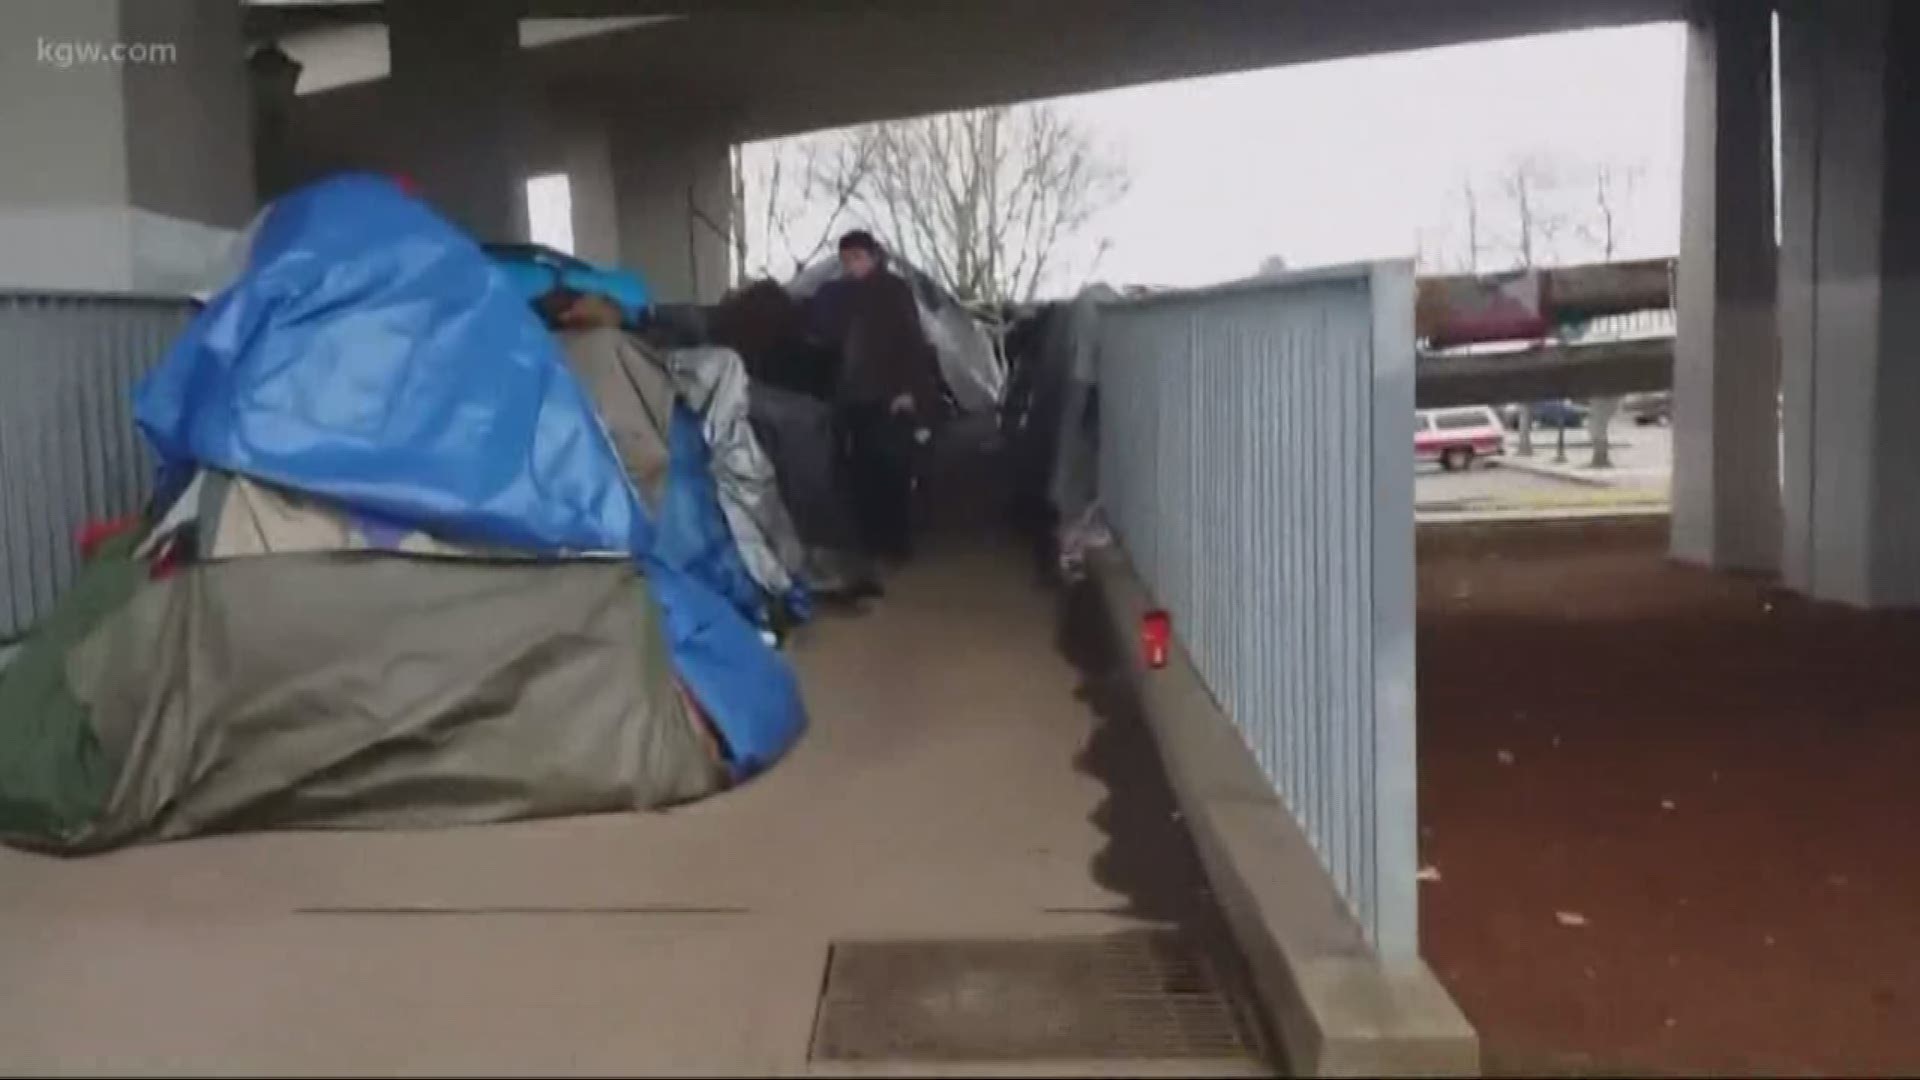 A homeless camp has taken over a walkway in Salem.